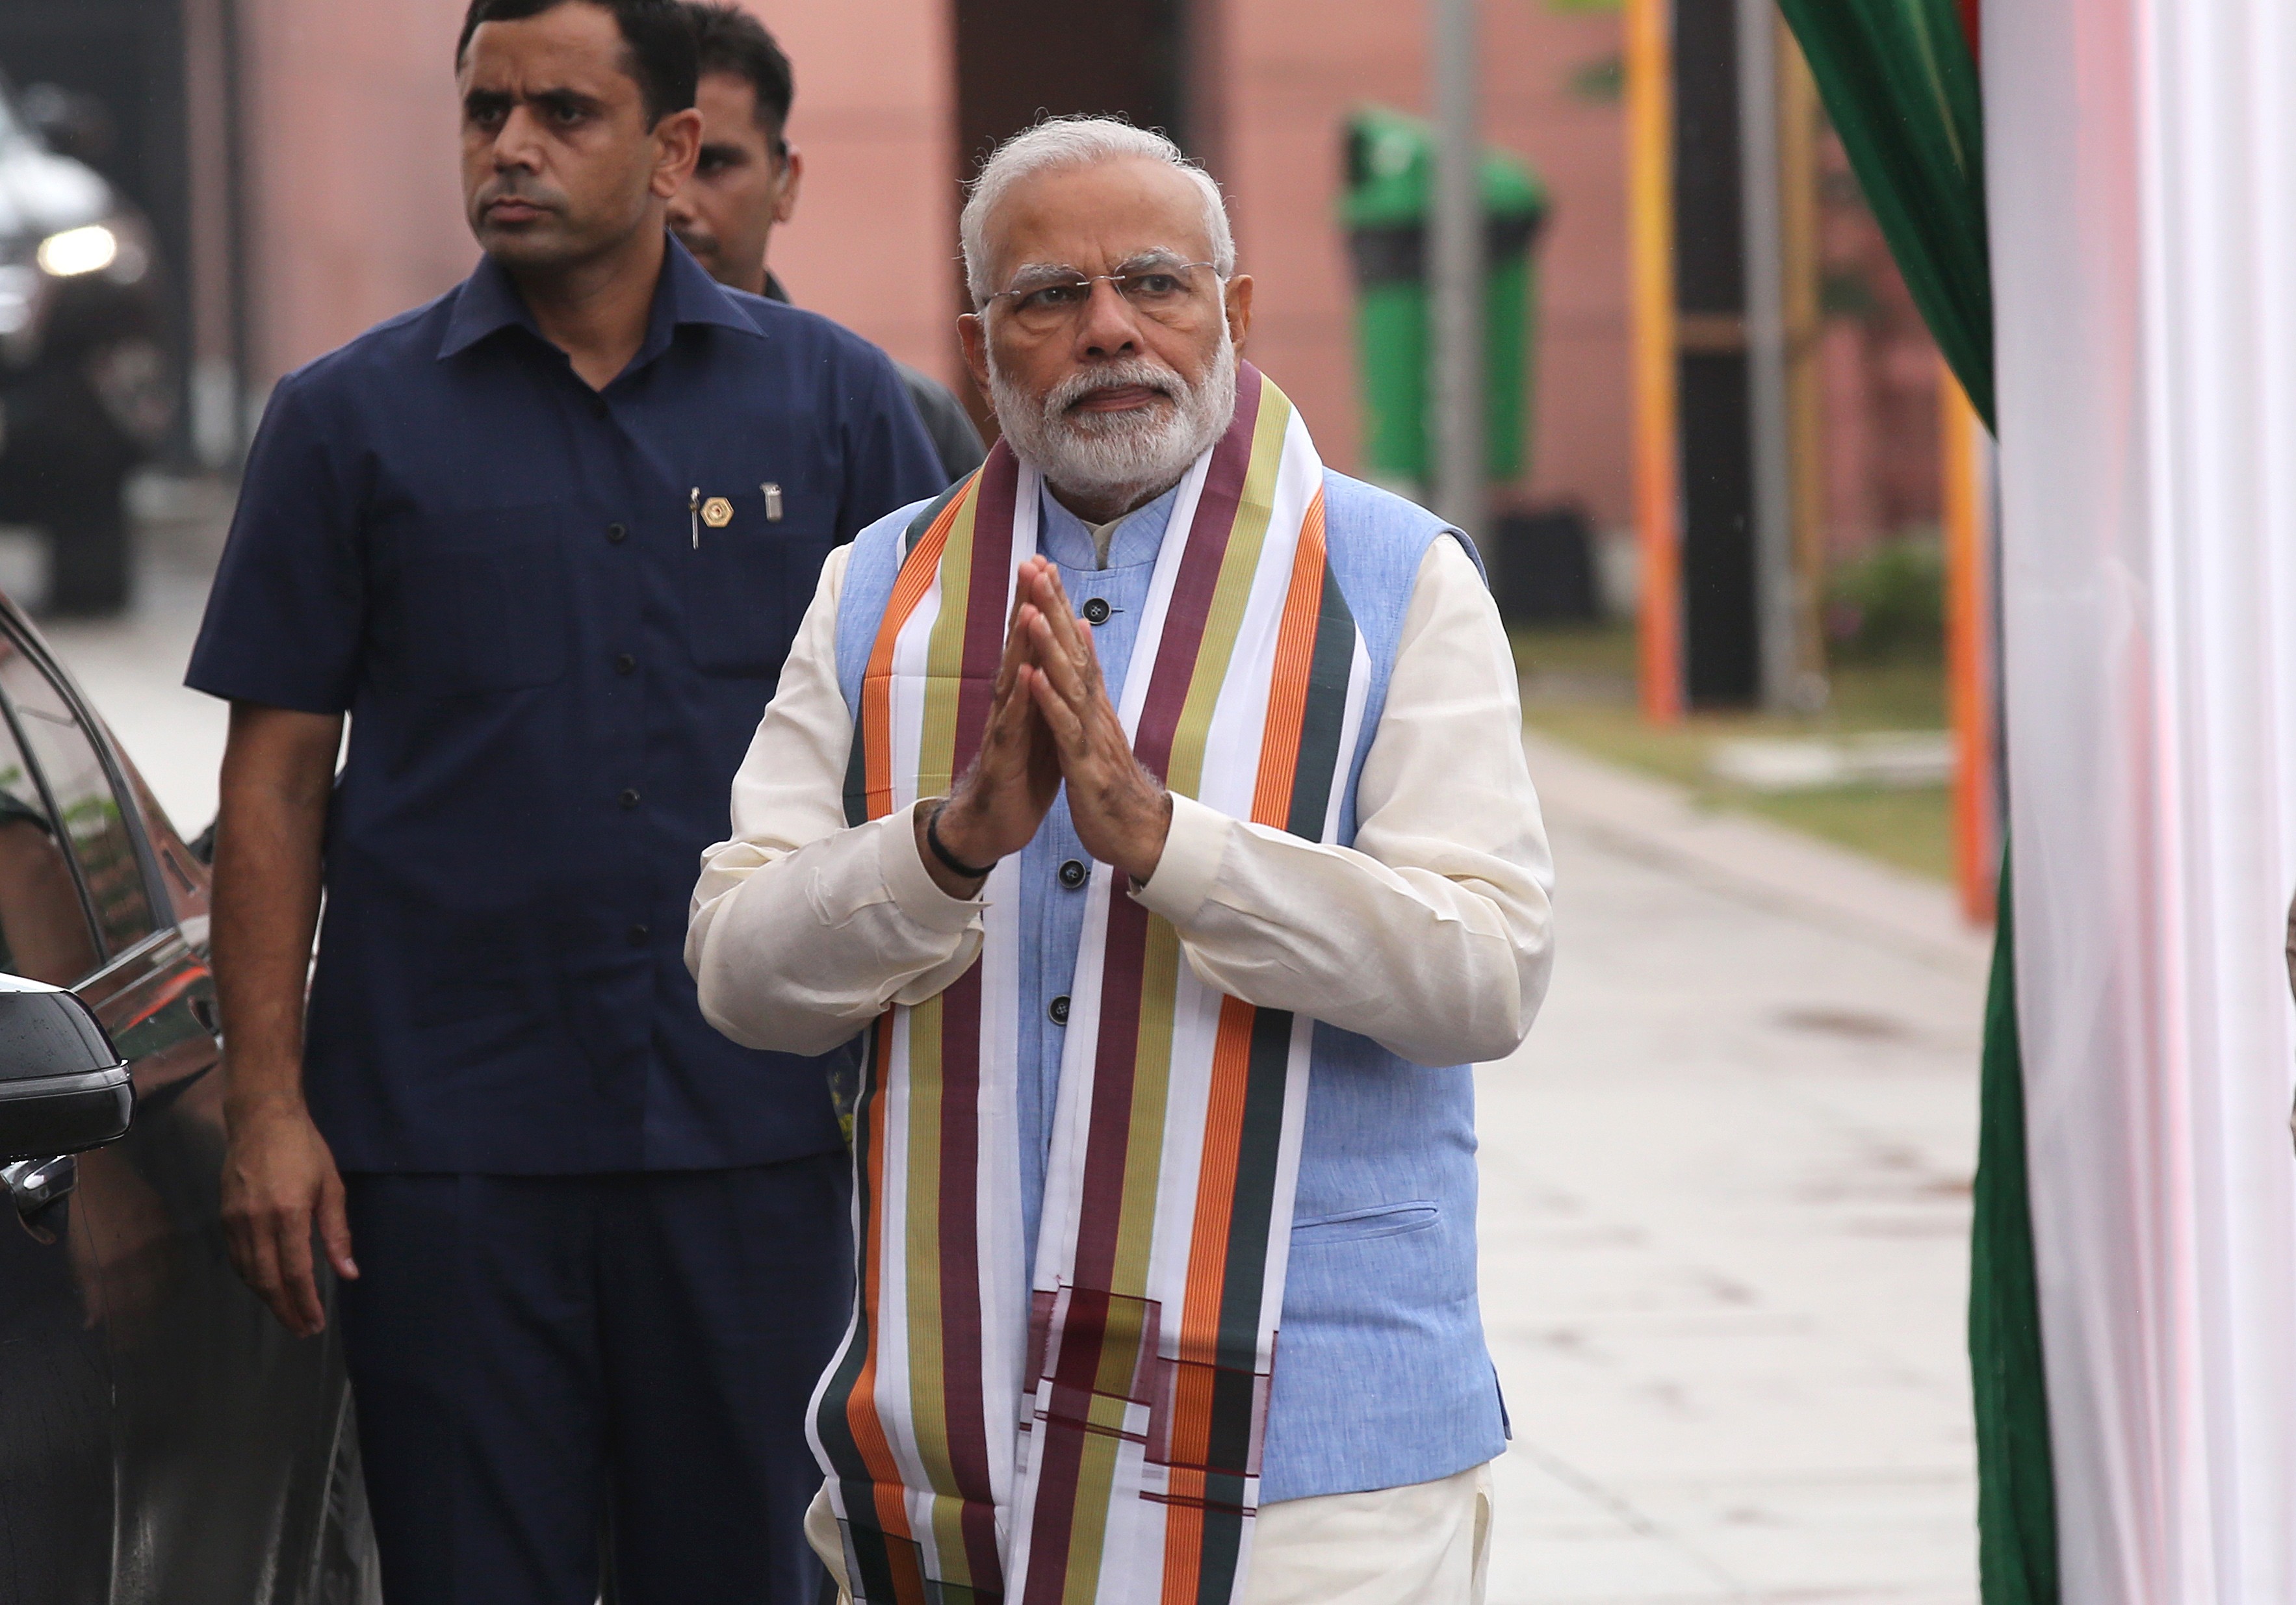 Prime Minister Narendra Modi promised that India would “no longer be helpless” against terrorism after the Pulwama attack, but there is little to suggest that subsequent events have prevented future attacks. Photo: EPA-EFE